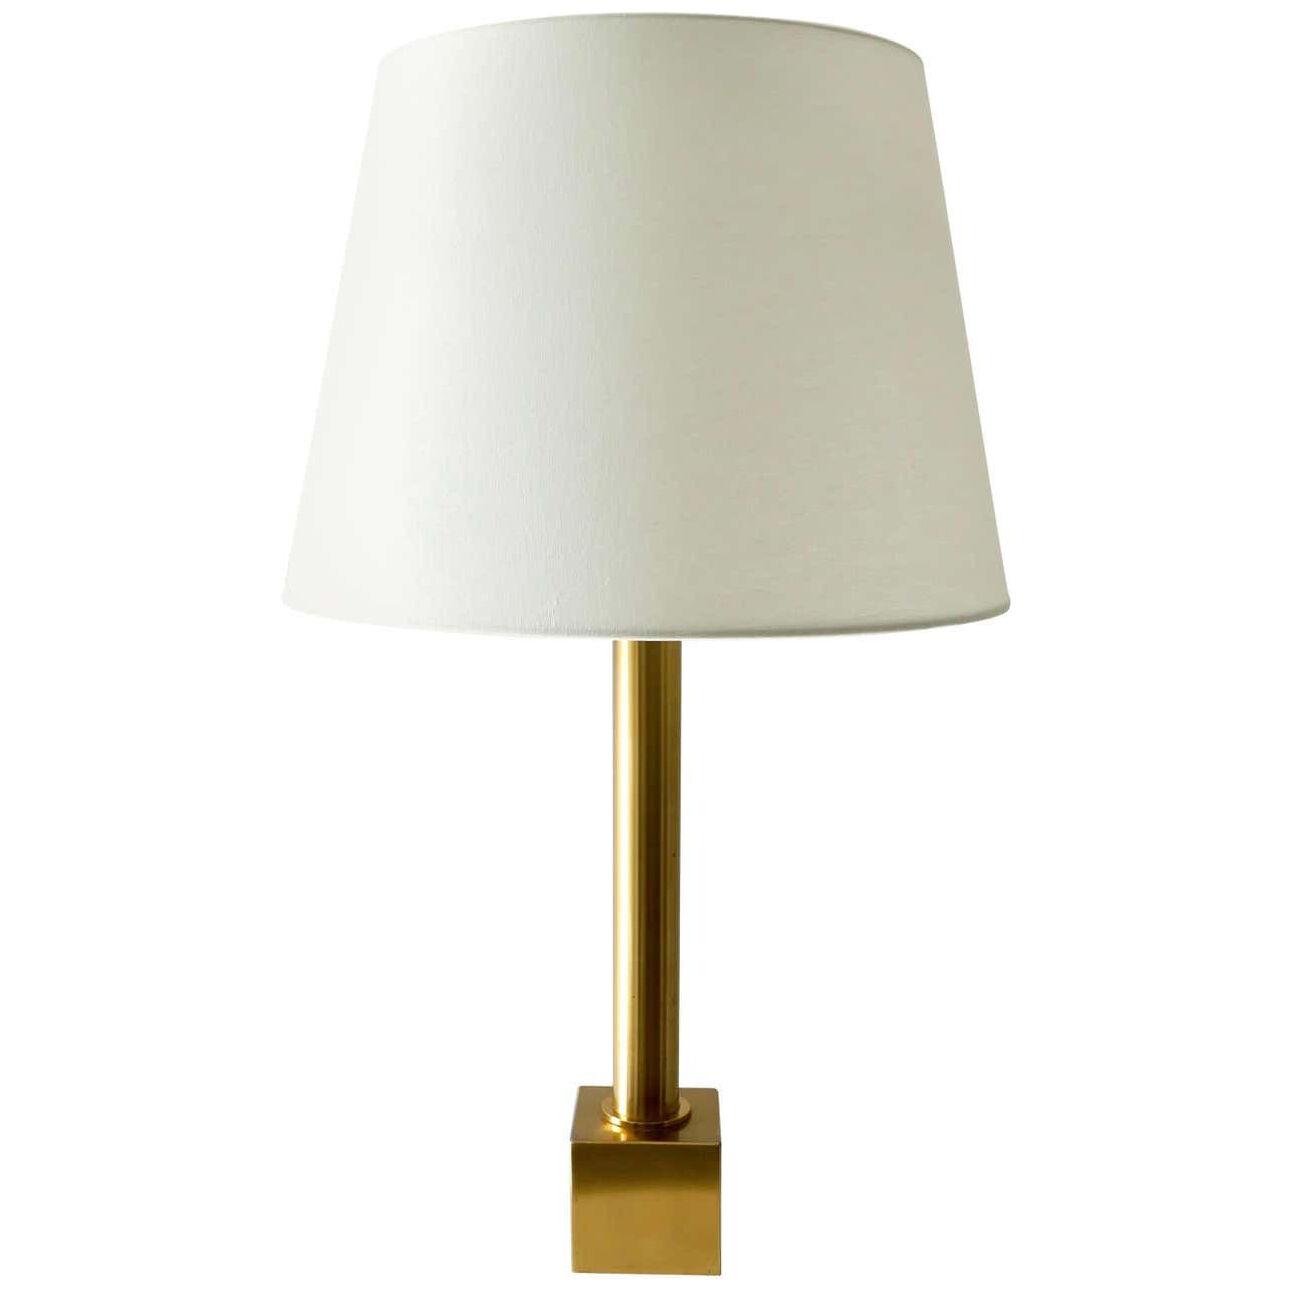 Large Brass Table Lamp with White Lamp Shade, Germany, 1970s